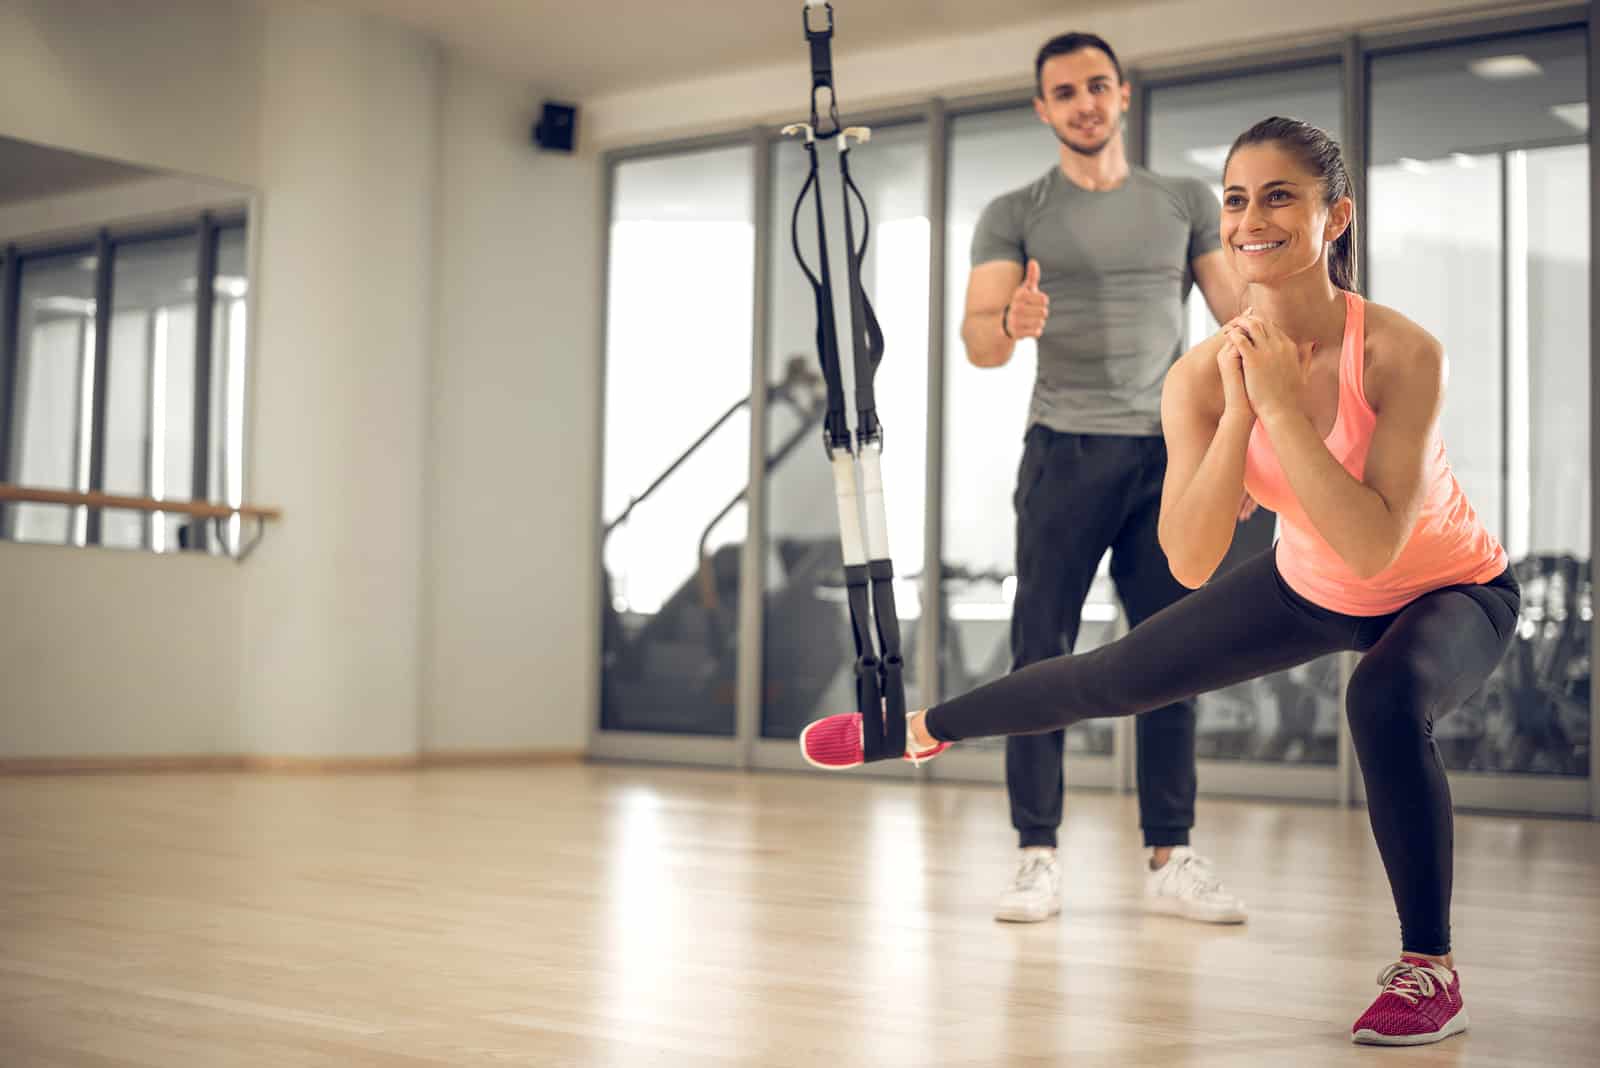 13 Signs Your Personal Trainer Likes You More Than A “Client”